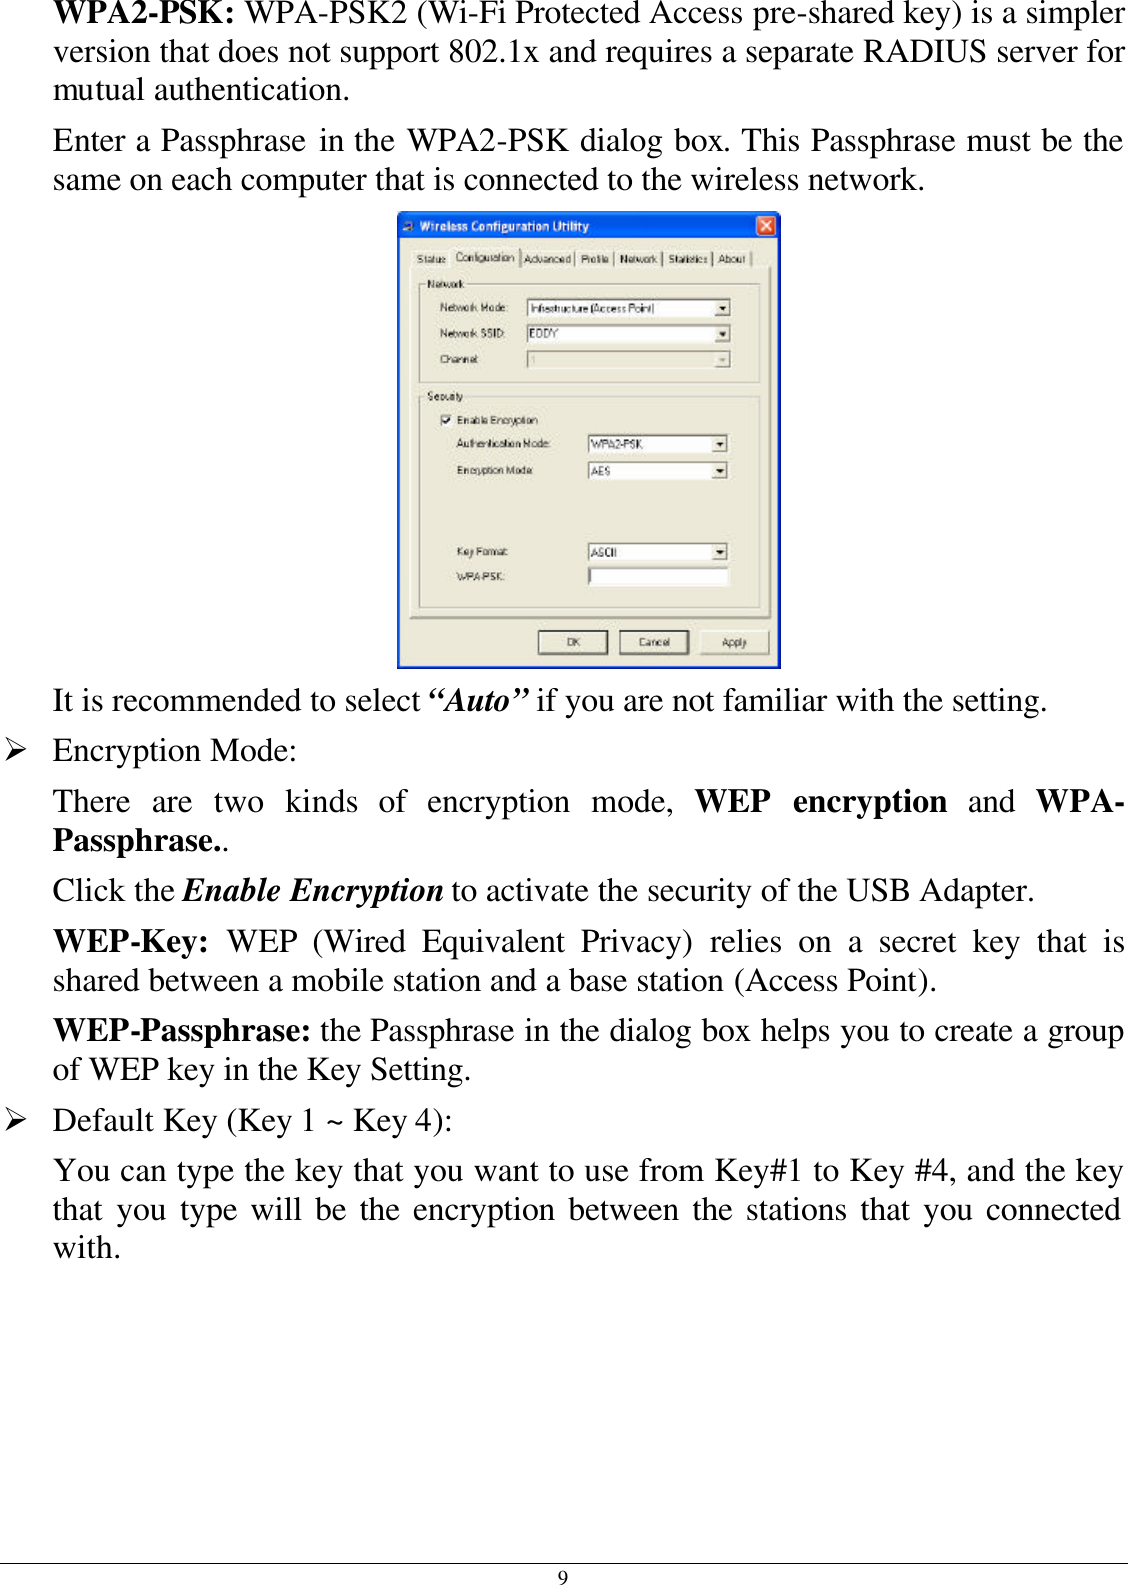 9 WPA2-PSK: WPA-PSK2 (Wi-Fi Protected Access pre-shared key) is a simpler version that does not support 802.1x and requires a separate RADIUS server for mutual authentication. Enter a Passphrase in the WPA2-PSK dialog box. This Passphrase must be the same on each computer that is connected to the wireless network.  It is recommended to select “Auto” if you are not familiar with the setting. Ø Encryption Mode:  There are two kinds of encryption mode, WEP encryption and WPA-Passphrase.. Click the Enable Encryption to activate the security of the USB Adapter. WEP-Key:  WEP (Wired Equivalent Privacy) relies on a secret key that is shared between a mobile station and a base station (Access Point). WEP-Passphrase: the Passphrase in the dialog box helps you to create a group of WEP key in the Key Setting. Ø Default Key (Key 1 ~ Key 4):  You can type the key that you want to use from Key#1 to Key #4, and the key that you type will be the encryption between the stations that you connected with.  